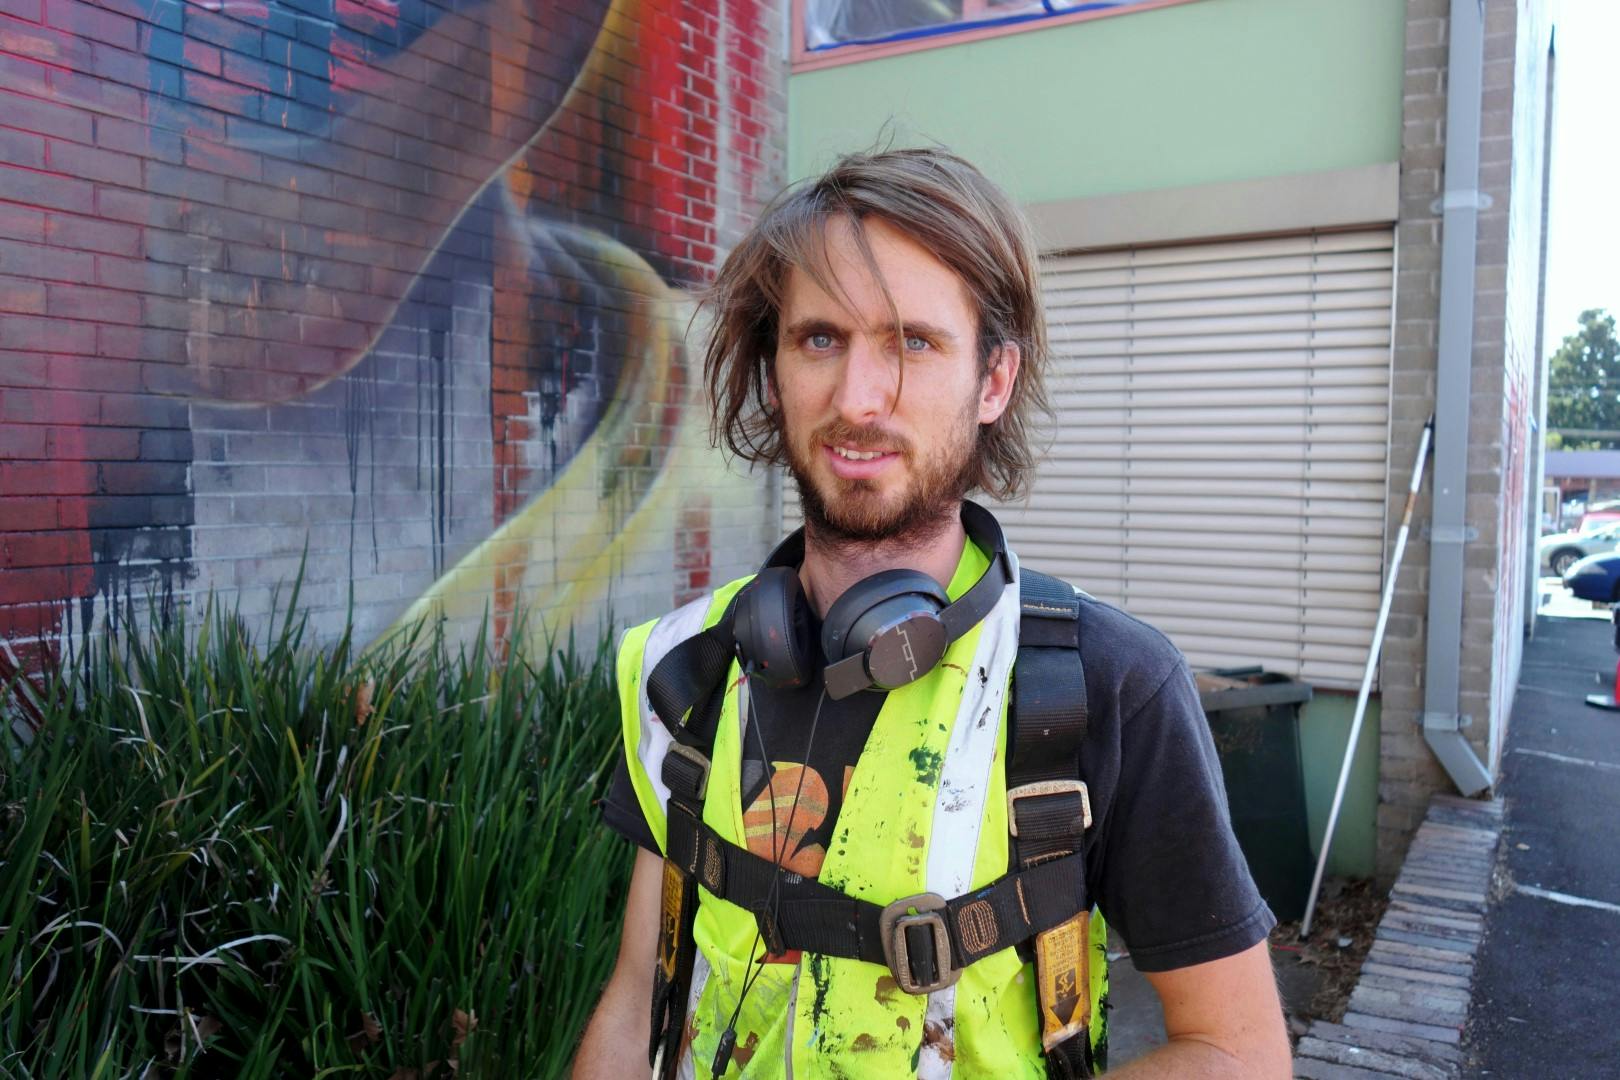 Artist Adnate painting the wall of the Shoalhaven Regional Art Gallery